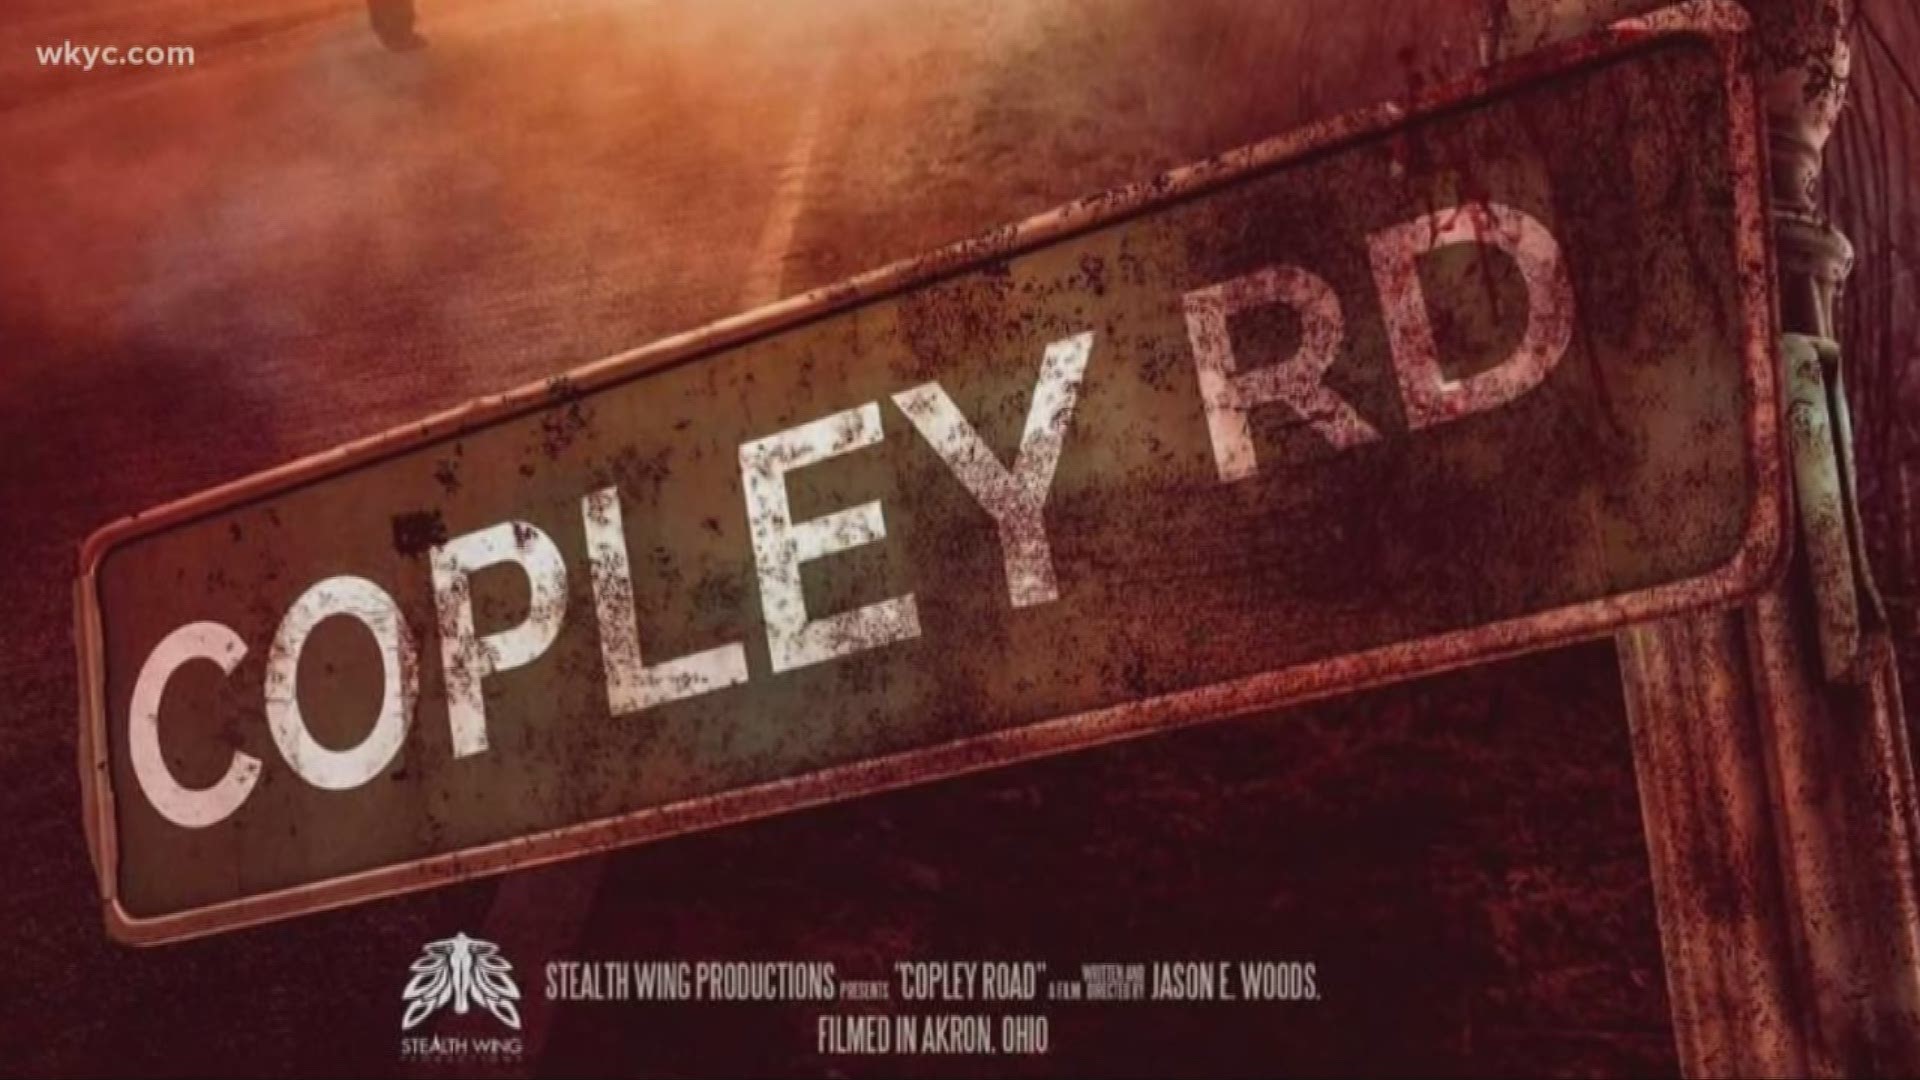 Oct. 14, 2019: Something scary is happening in Akron. Film crews have announced plans for 'Copley Road,' which is a horror movie based in Akron.